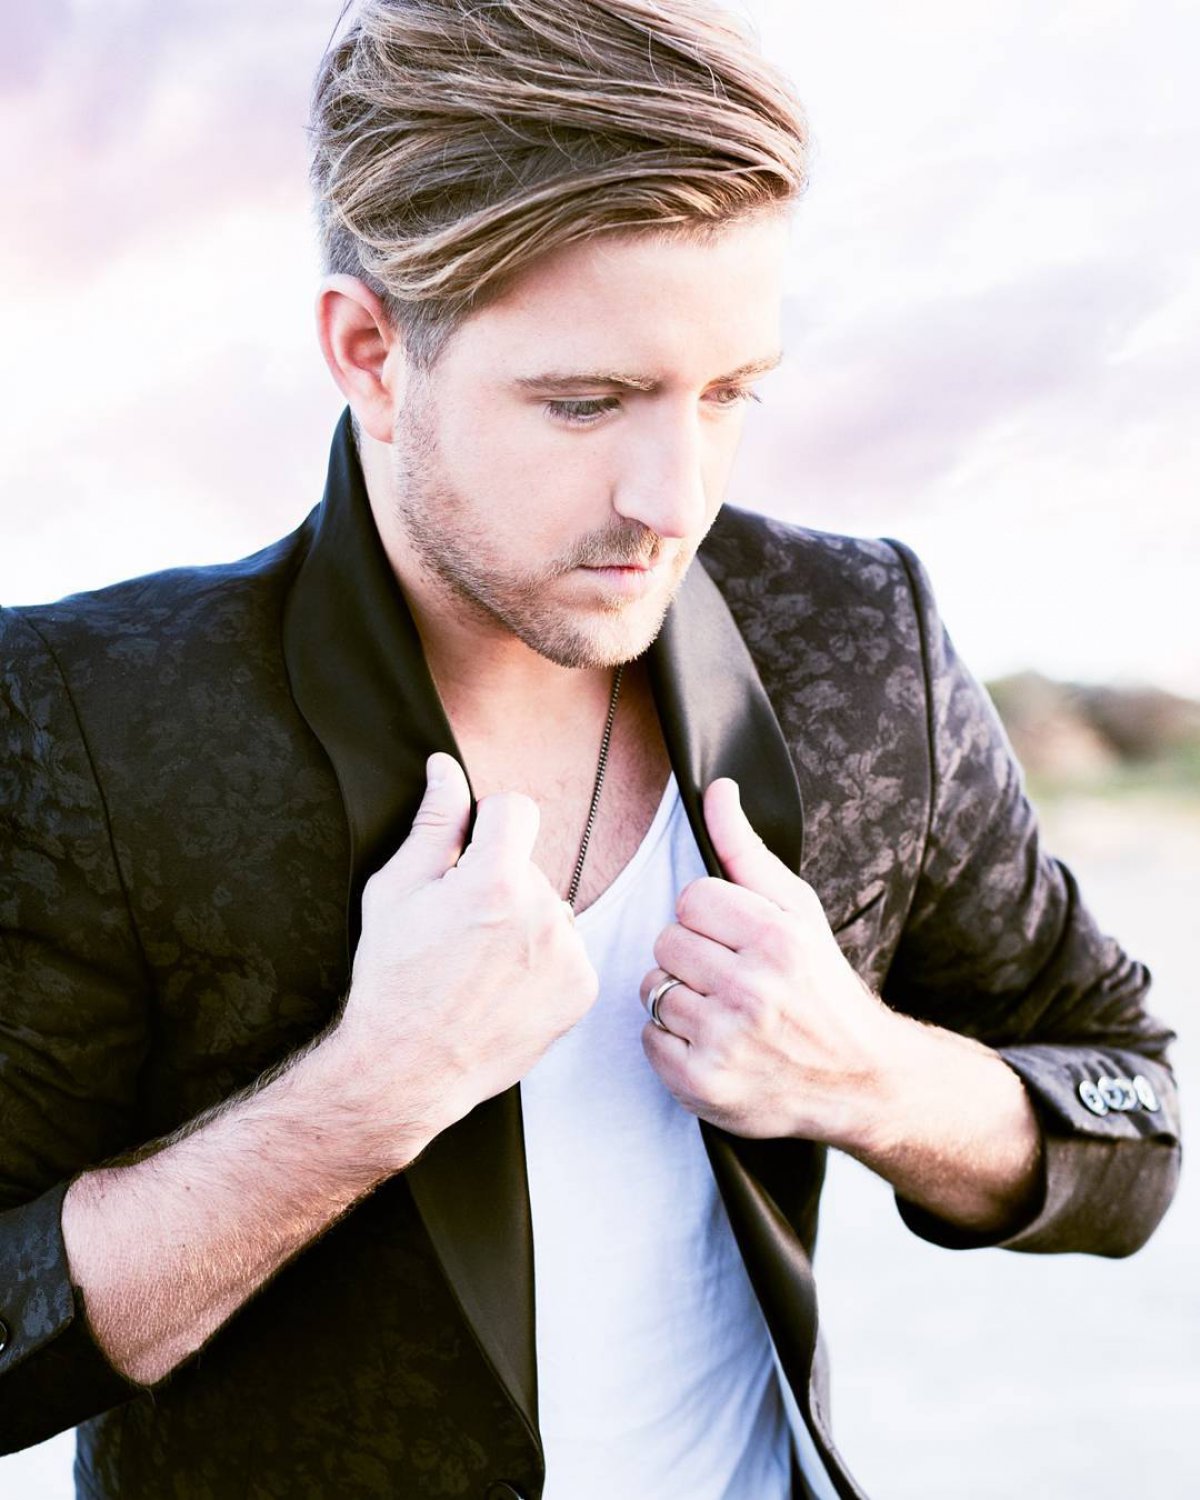 Exclusive: Billy Gilman talks 'The Voice' - It was an amazing platform ...